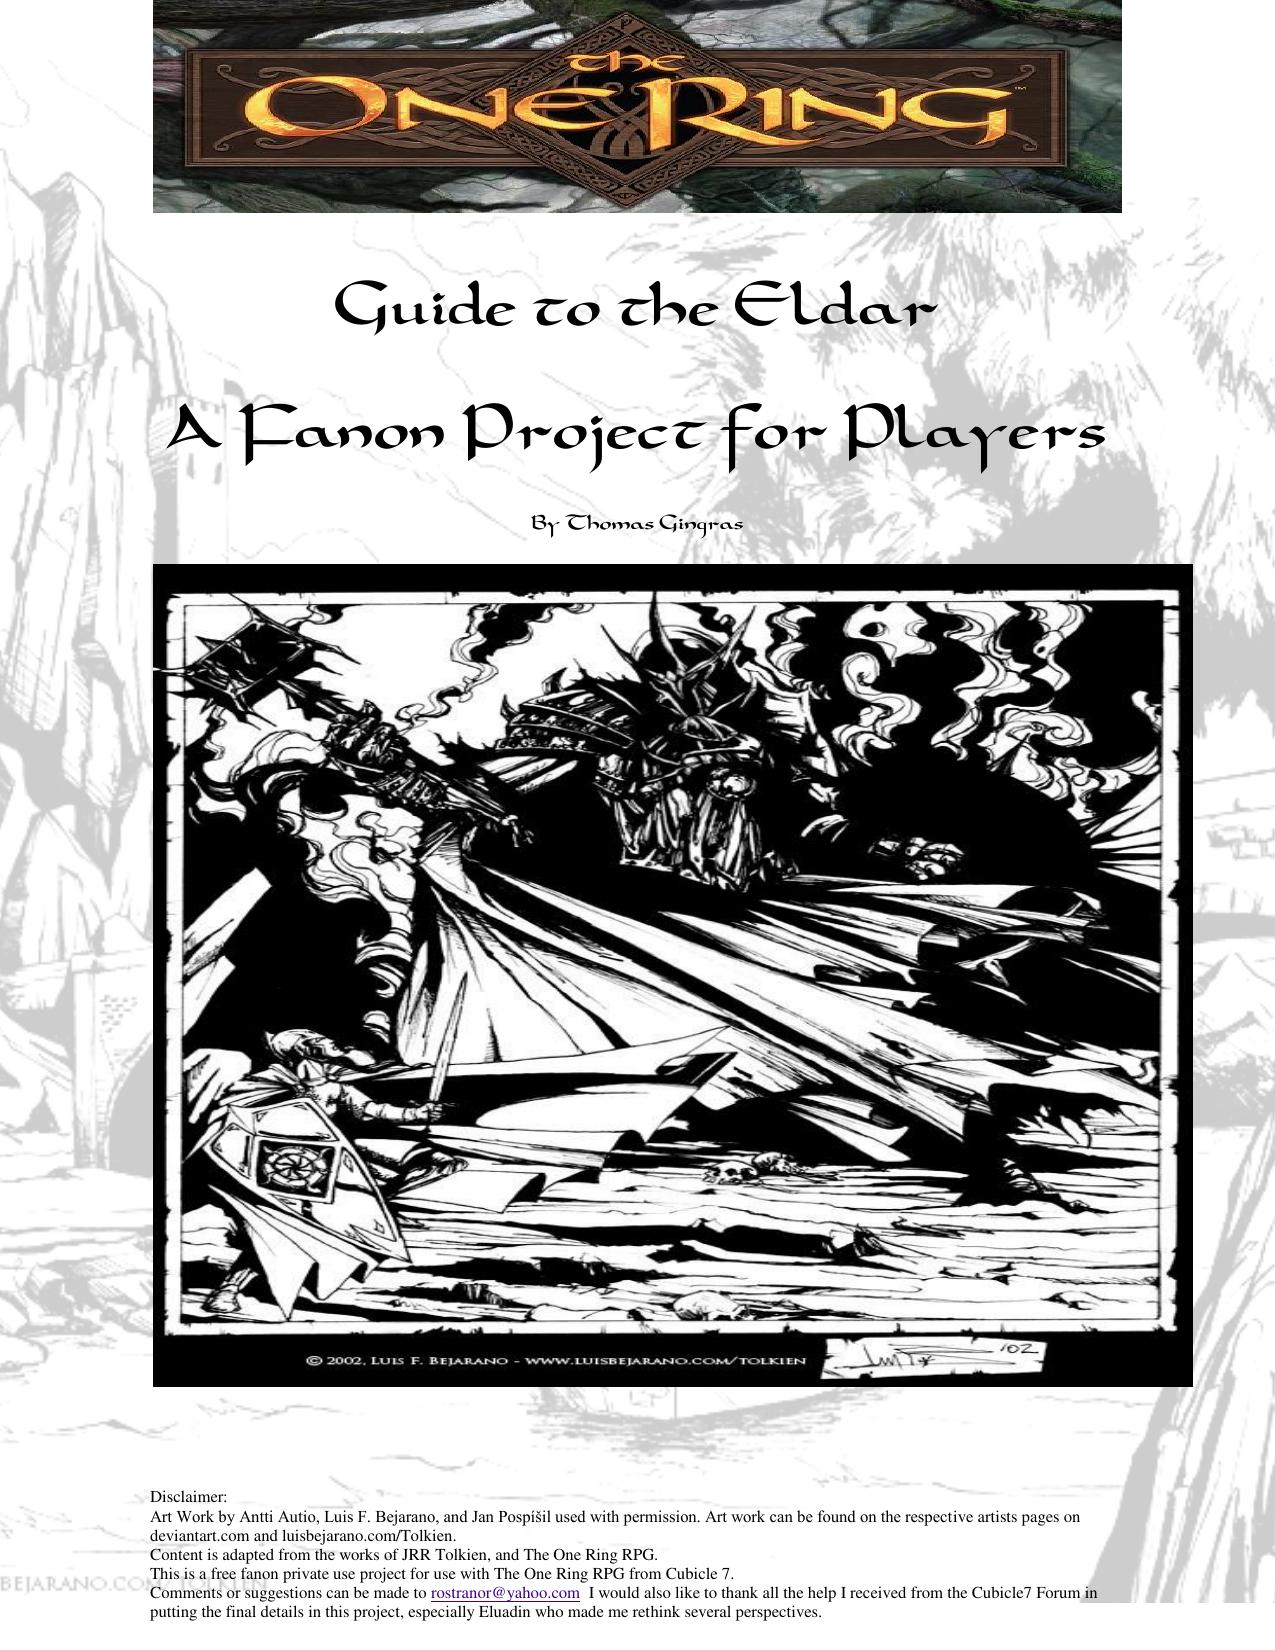 Guide to the Eldar